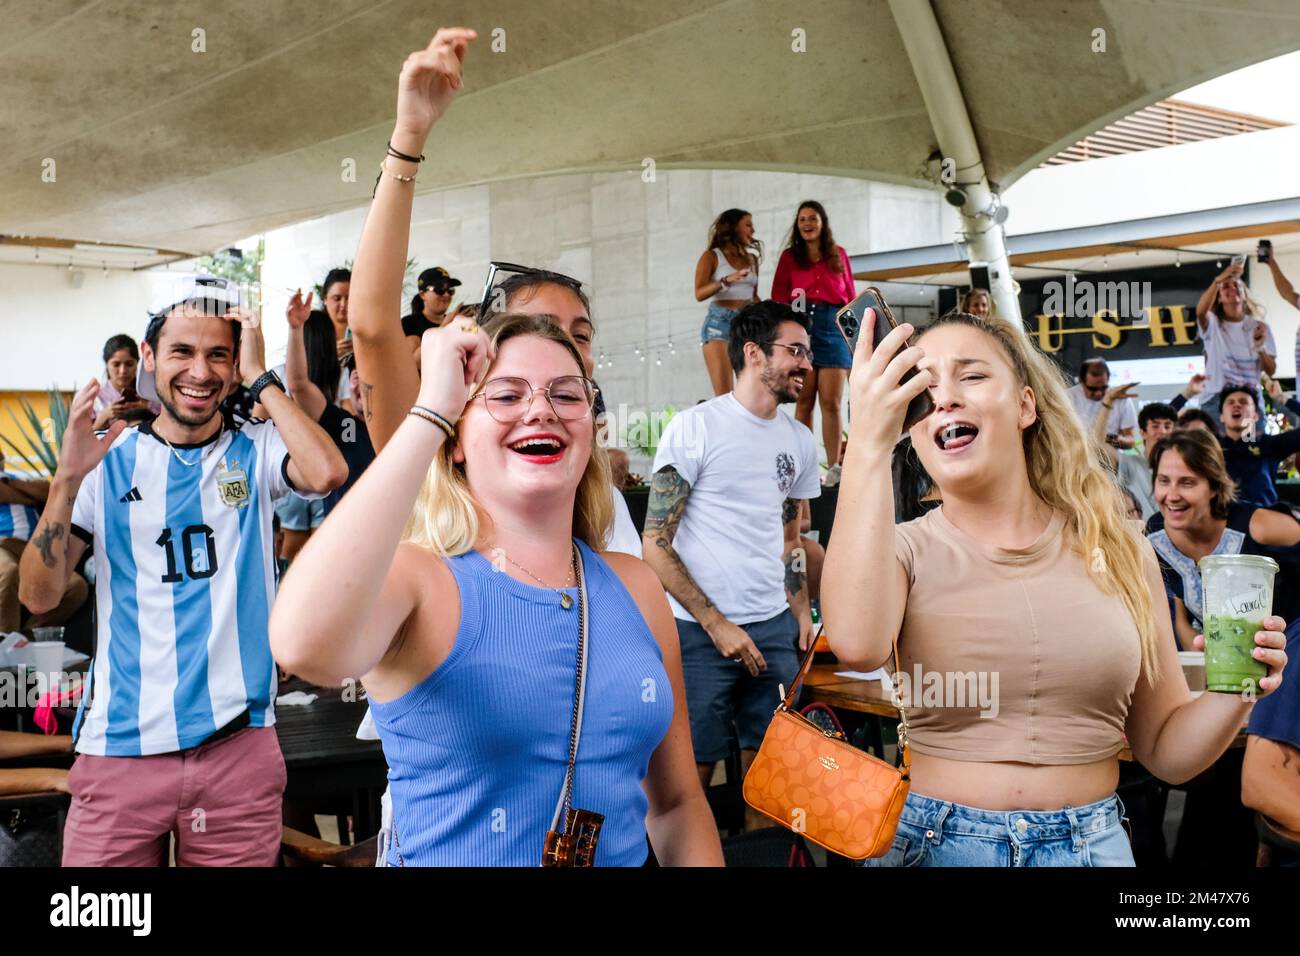 Soccer fans gathered outside a cafe in Merida Mexico to watch the FIFA World final Cup Soccer game between France and Argentina, December 18, 2022 Stock Photo